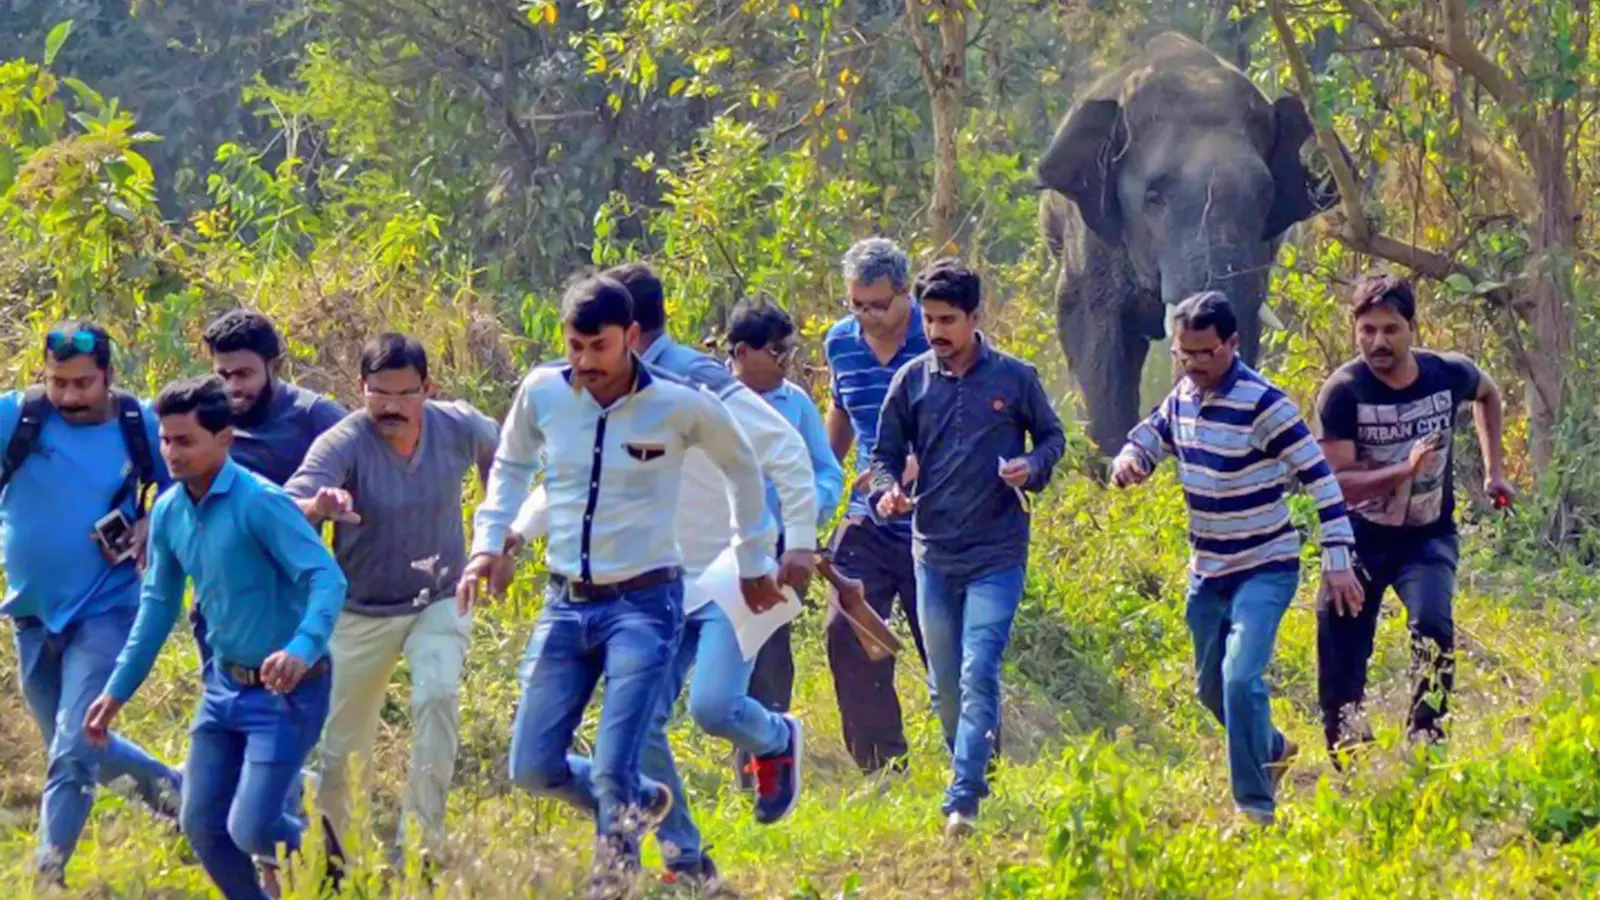 Locals run for cover after being chased by wild elephants in Howrah district of West Bengal. Photo: PTI